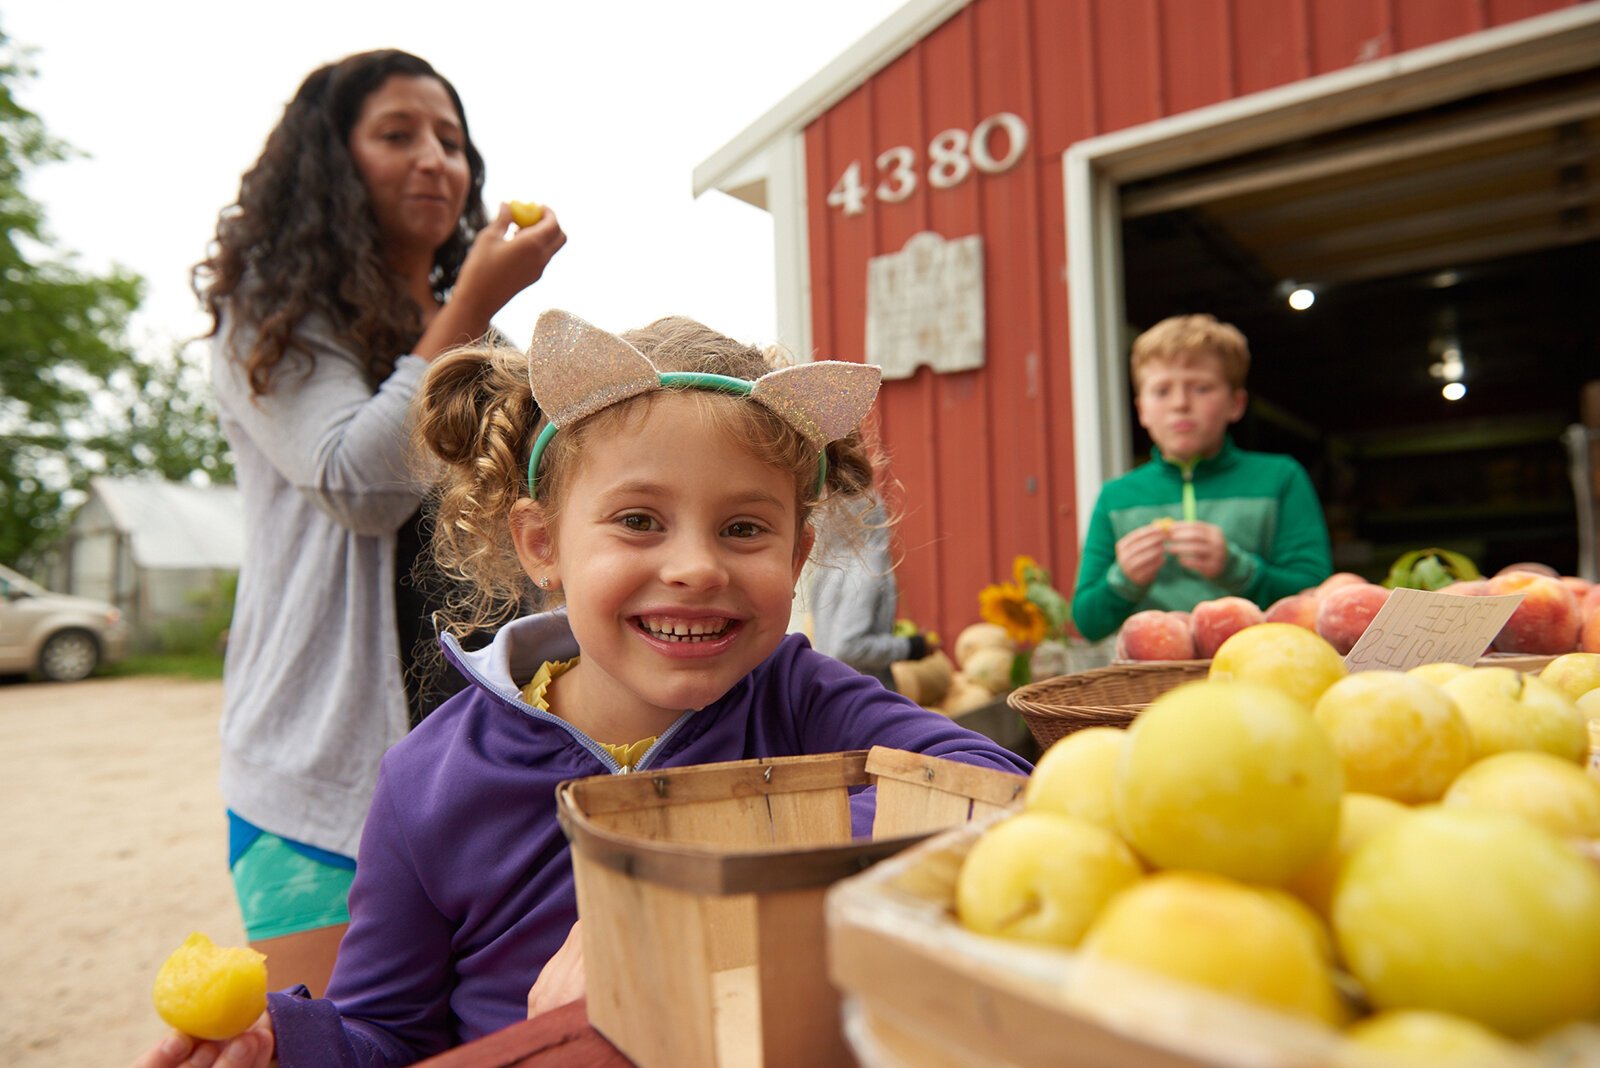 Families enjoying fresh fruits and vegetables at a local farm stand.